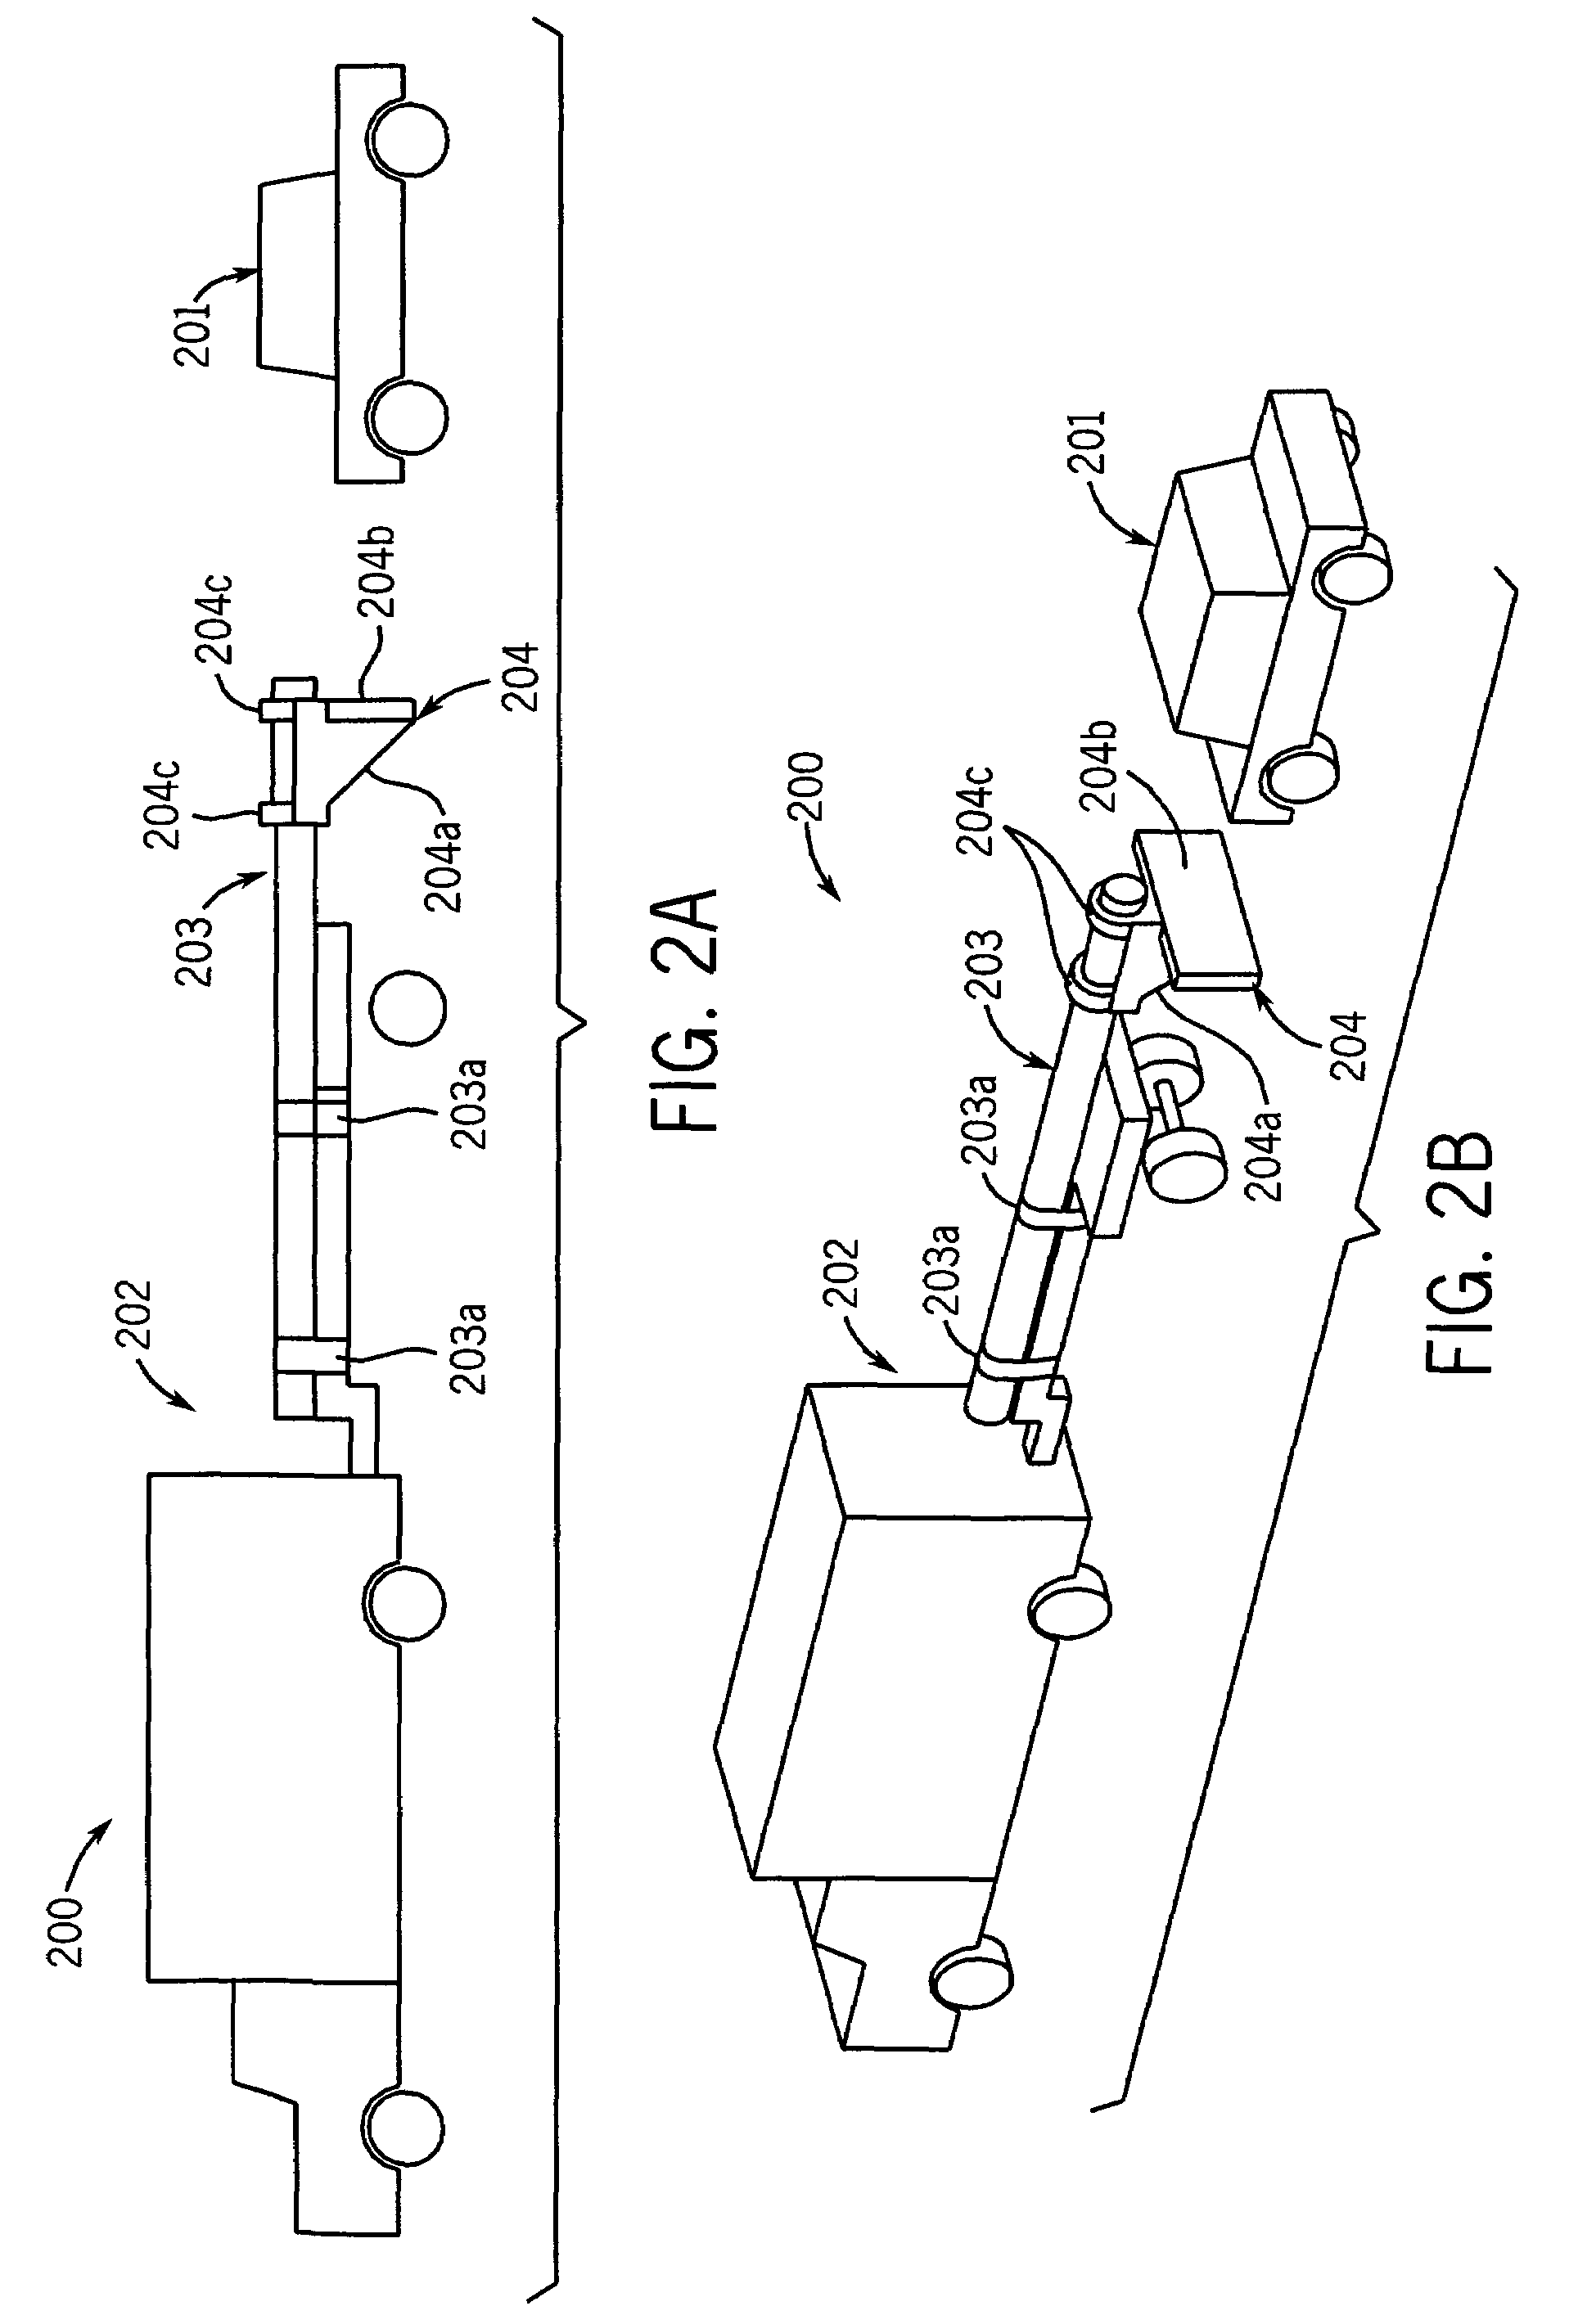 Collision barrier device for projecting loads